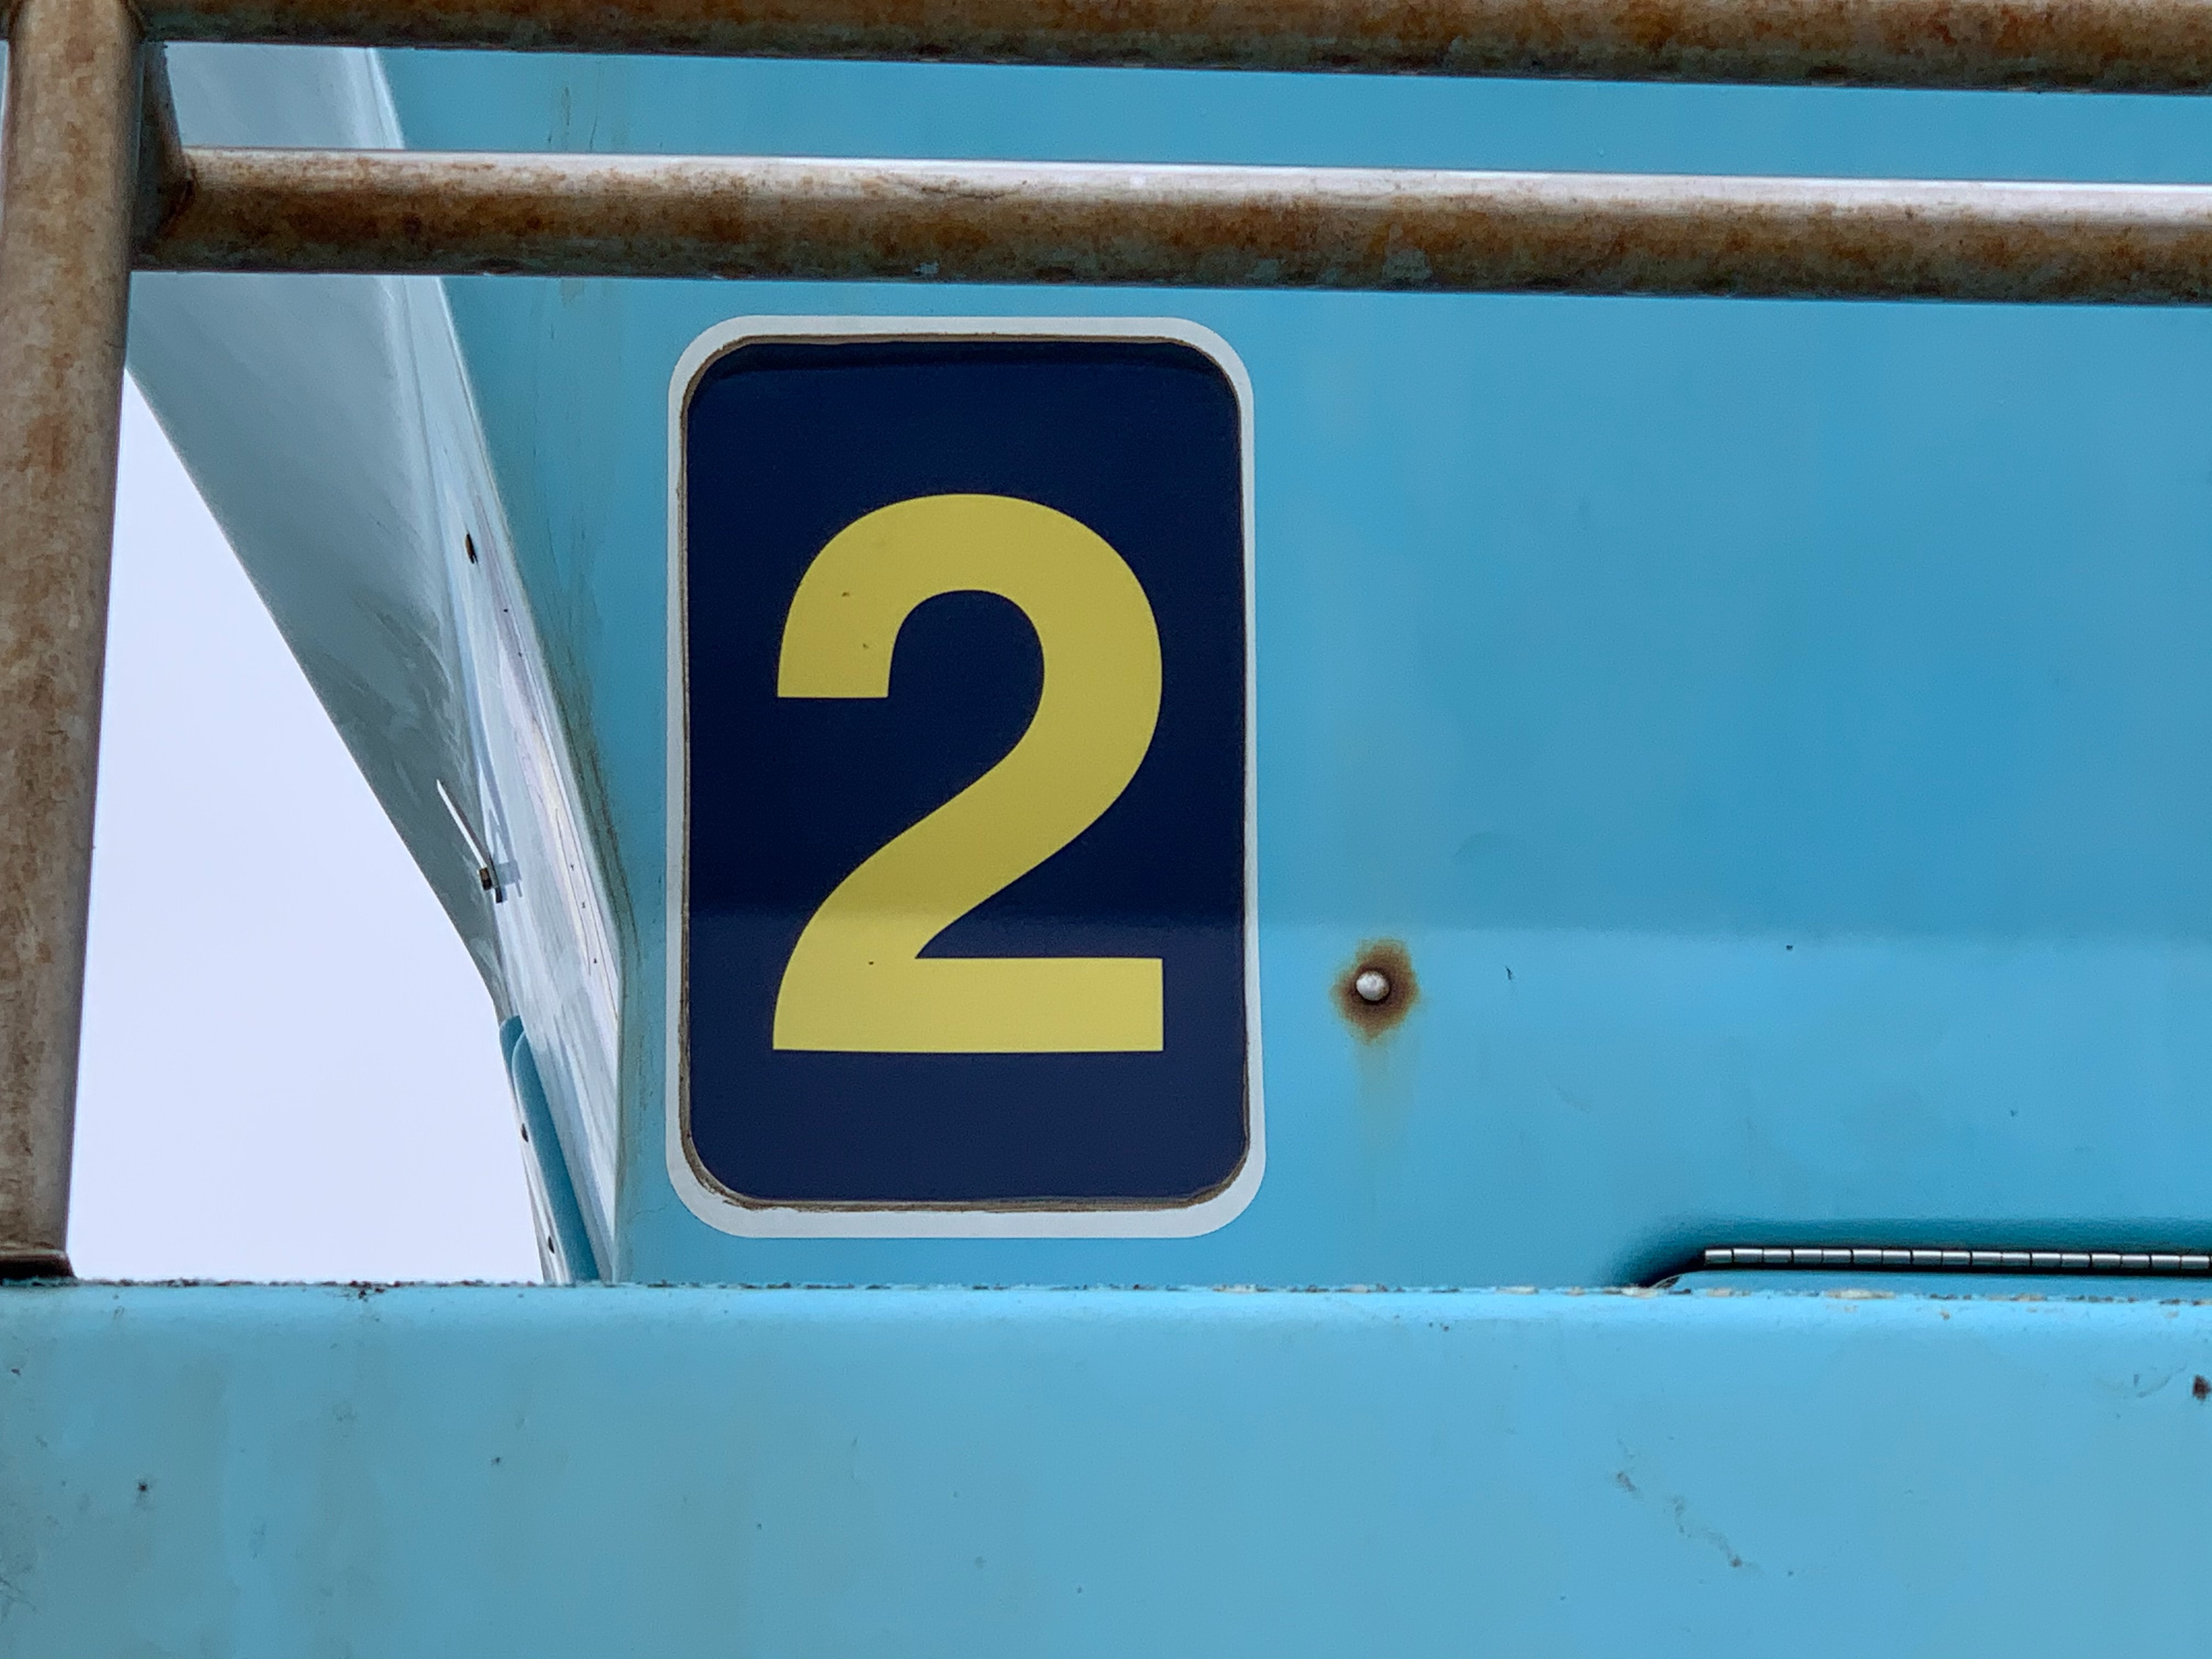 When is 10 = 2? Photo by mike hoydich on Unsplash